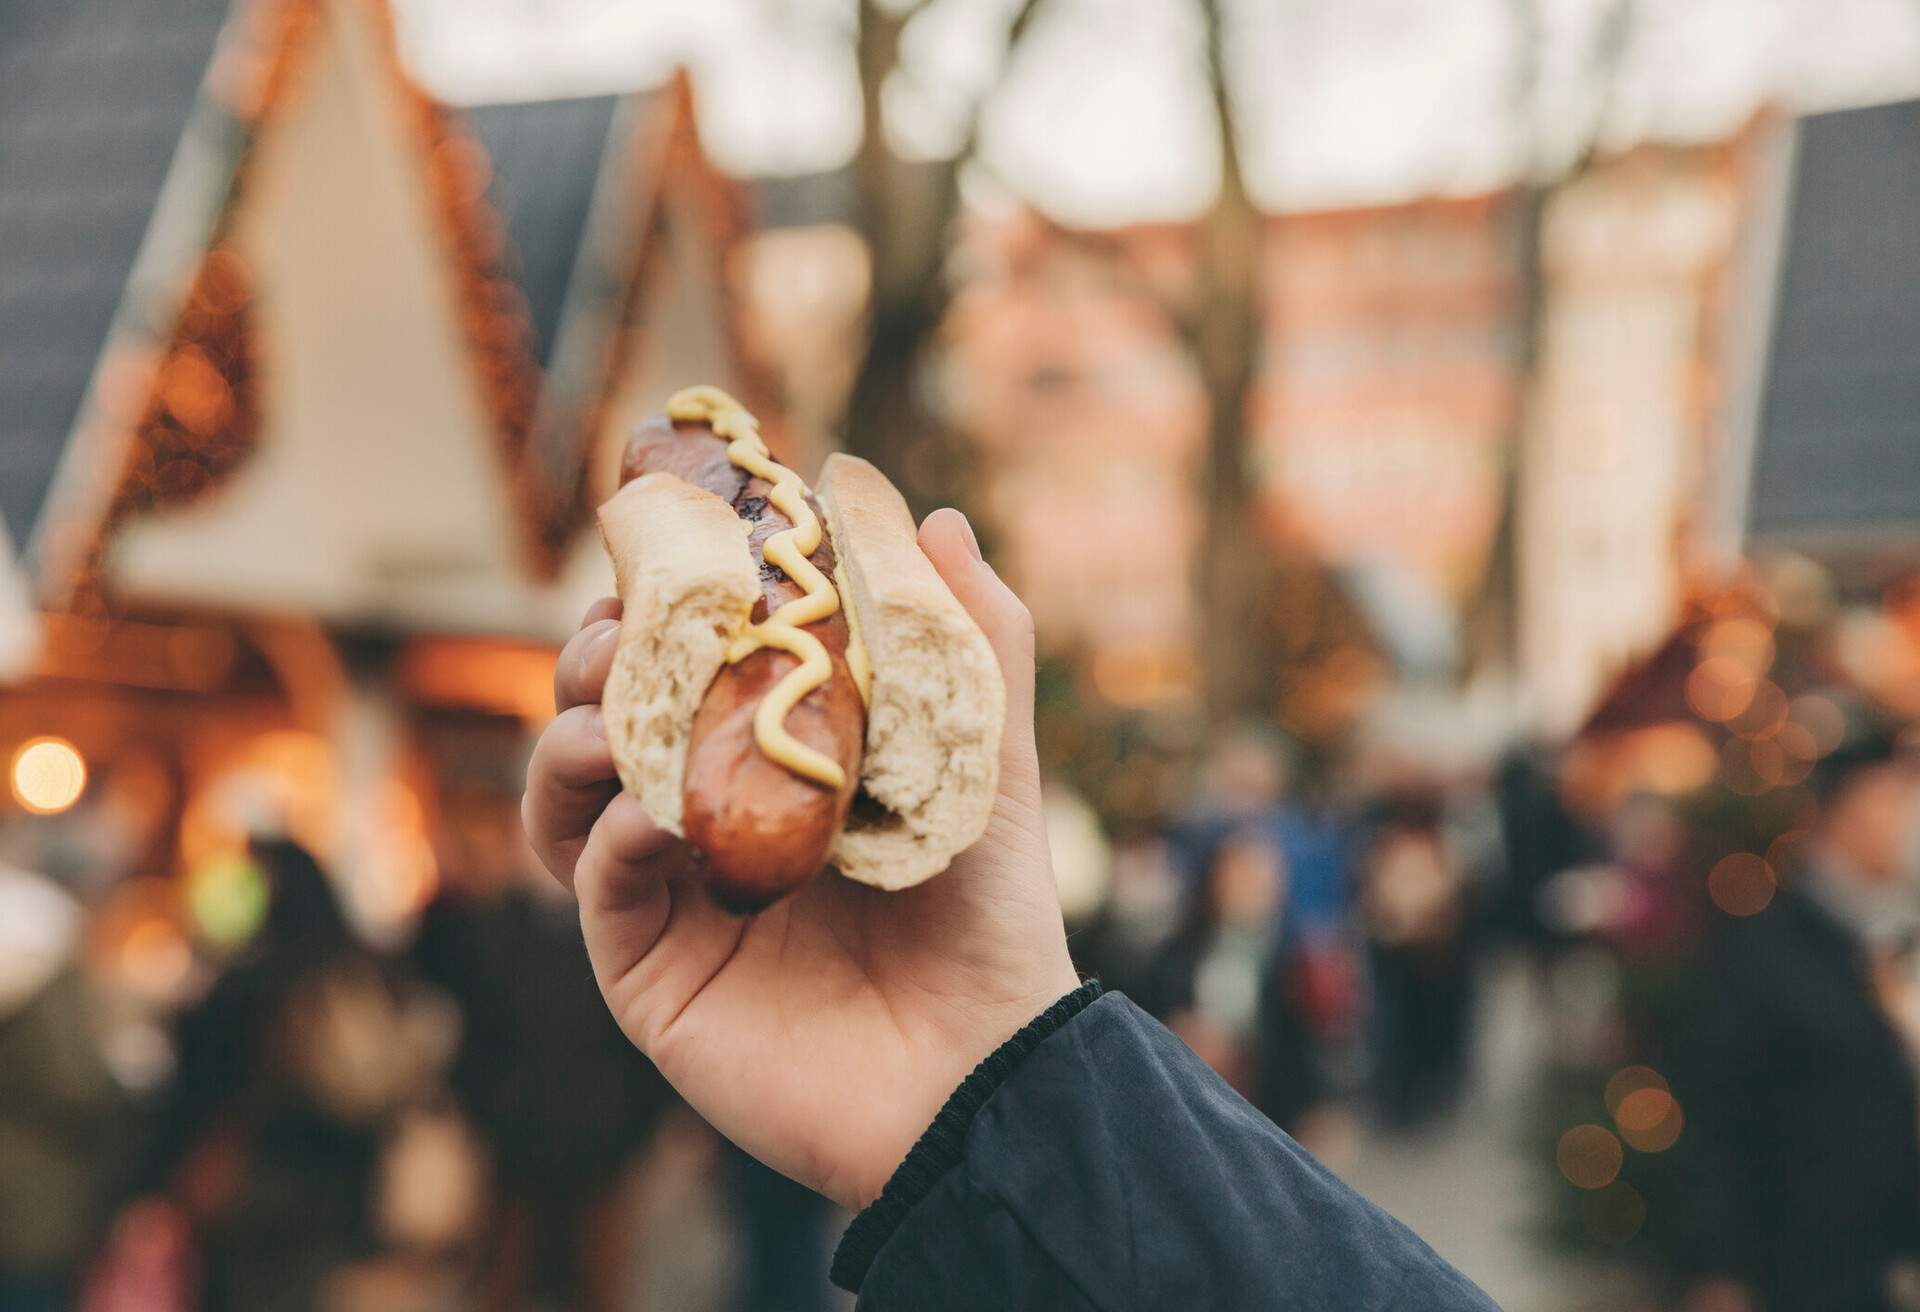 A hand of a person holding a hotdog sandwich on a blurred background of crowded Christmas market.